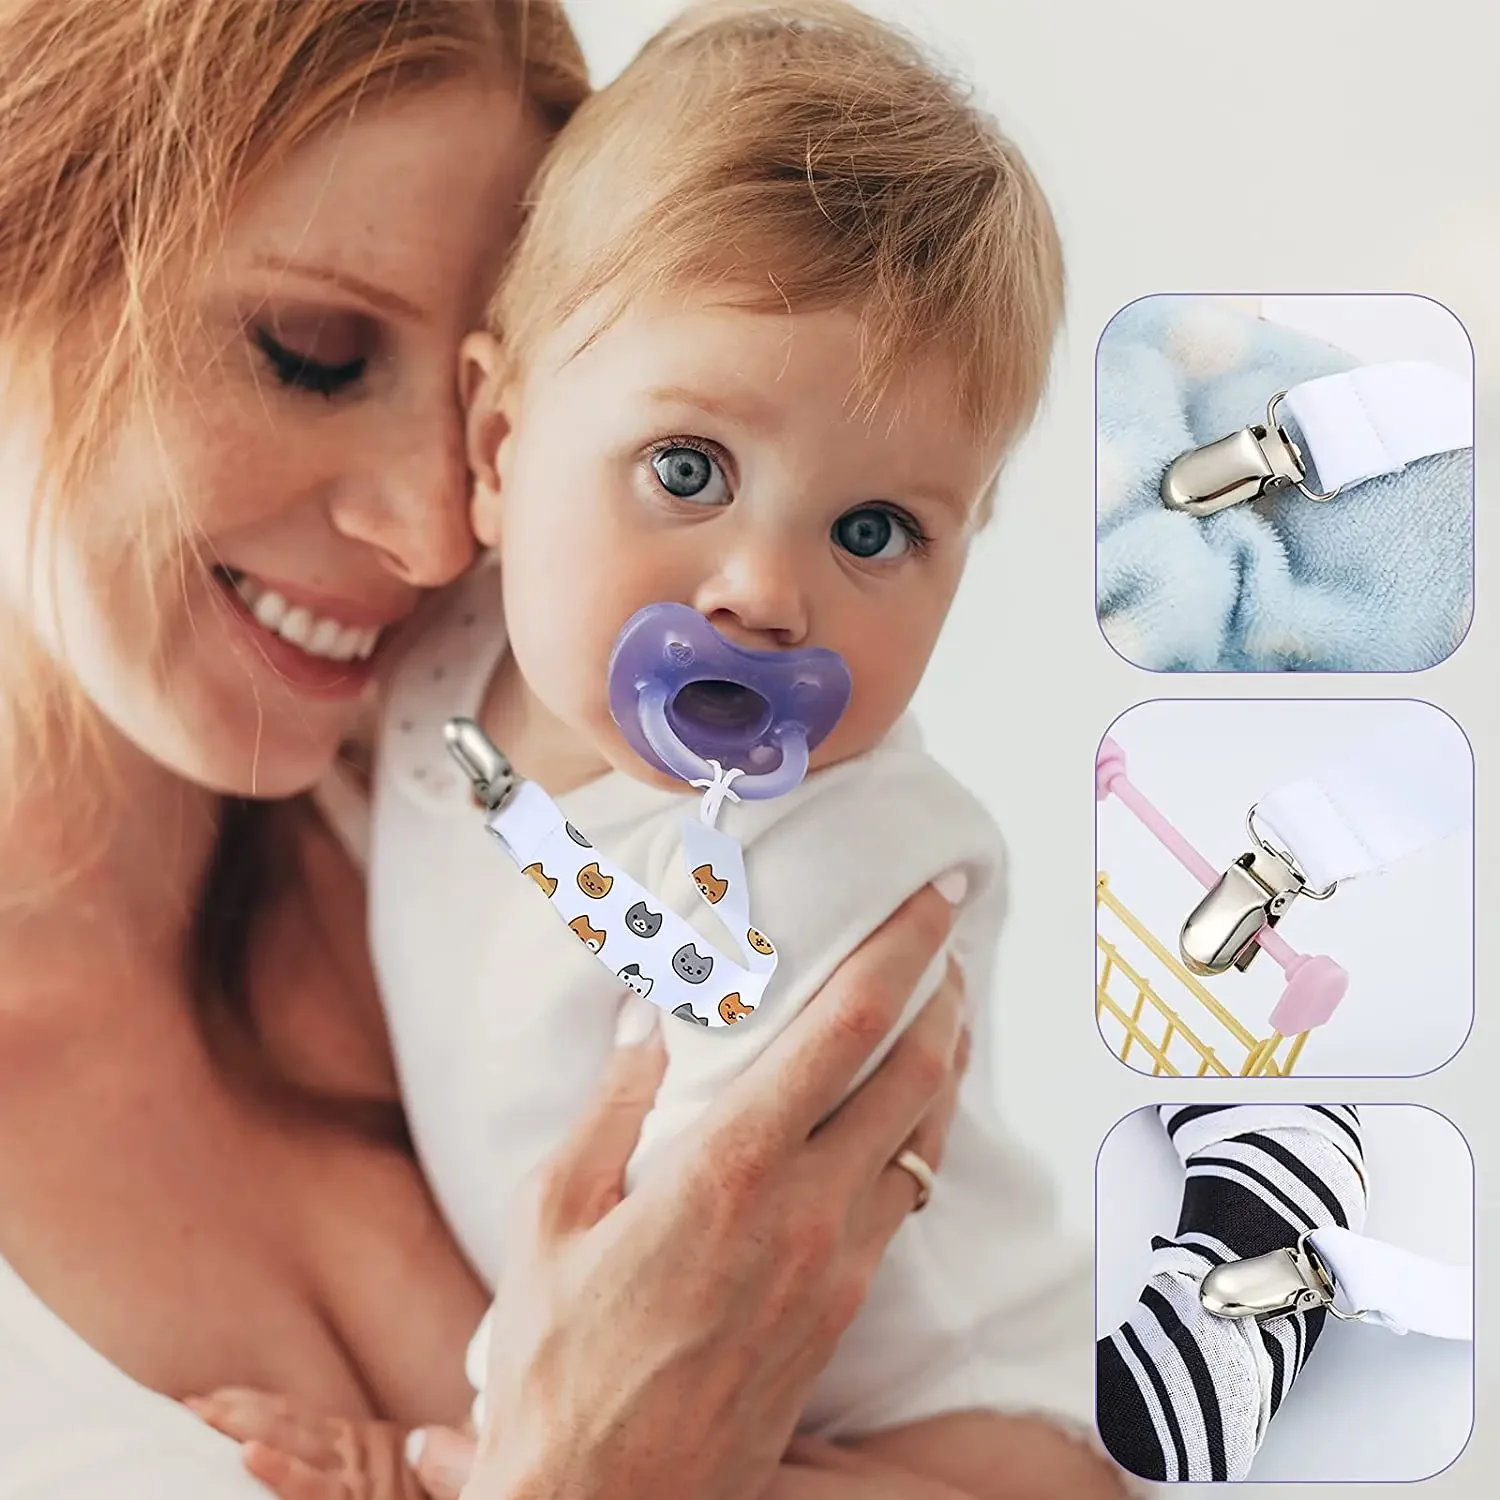 10pcs/Lot Non Toxic Texile Clip Pacifiers Sublimation Blanks Printable Baby Pacifier Clips For Boys Girls Fits Baby Teething Toy